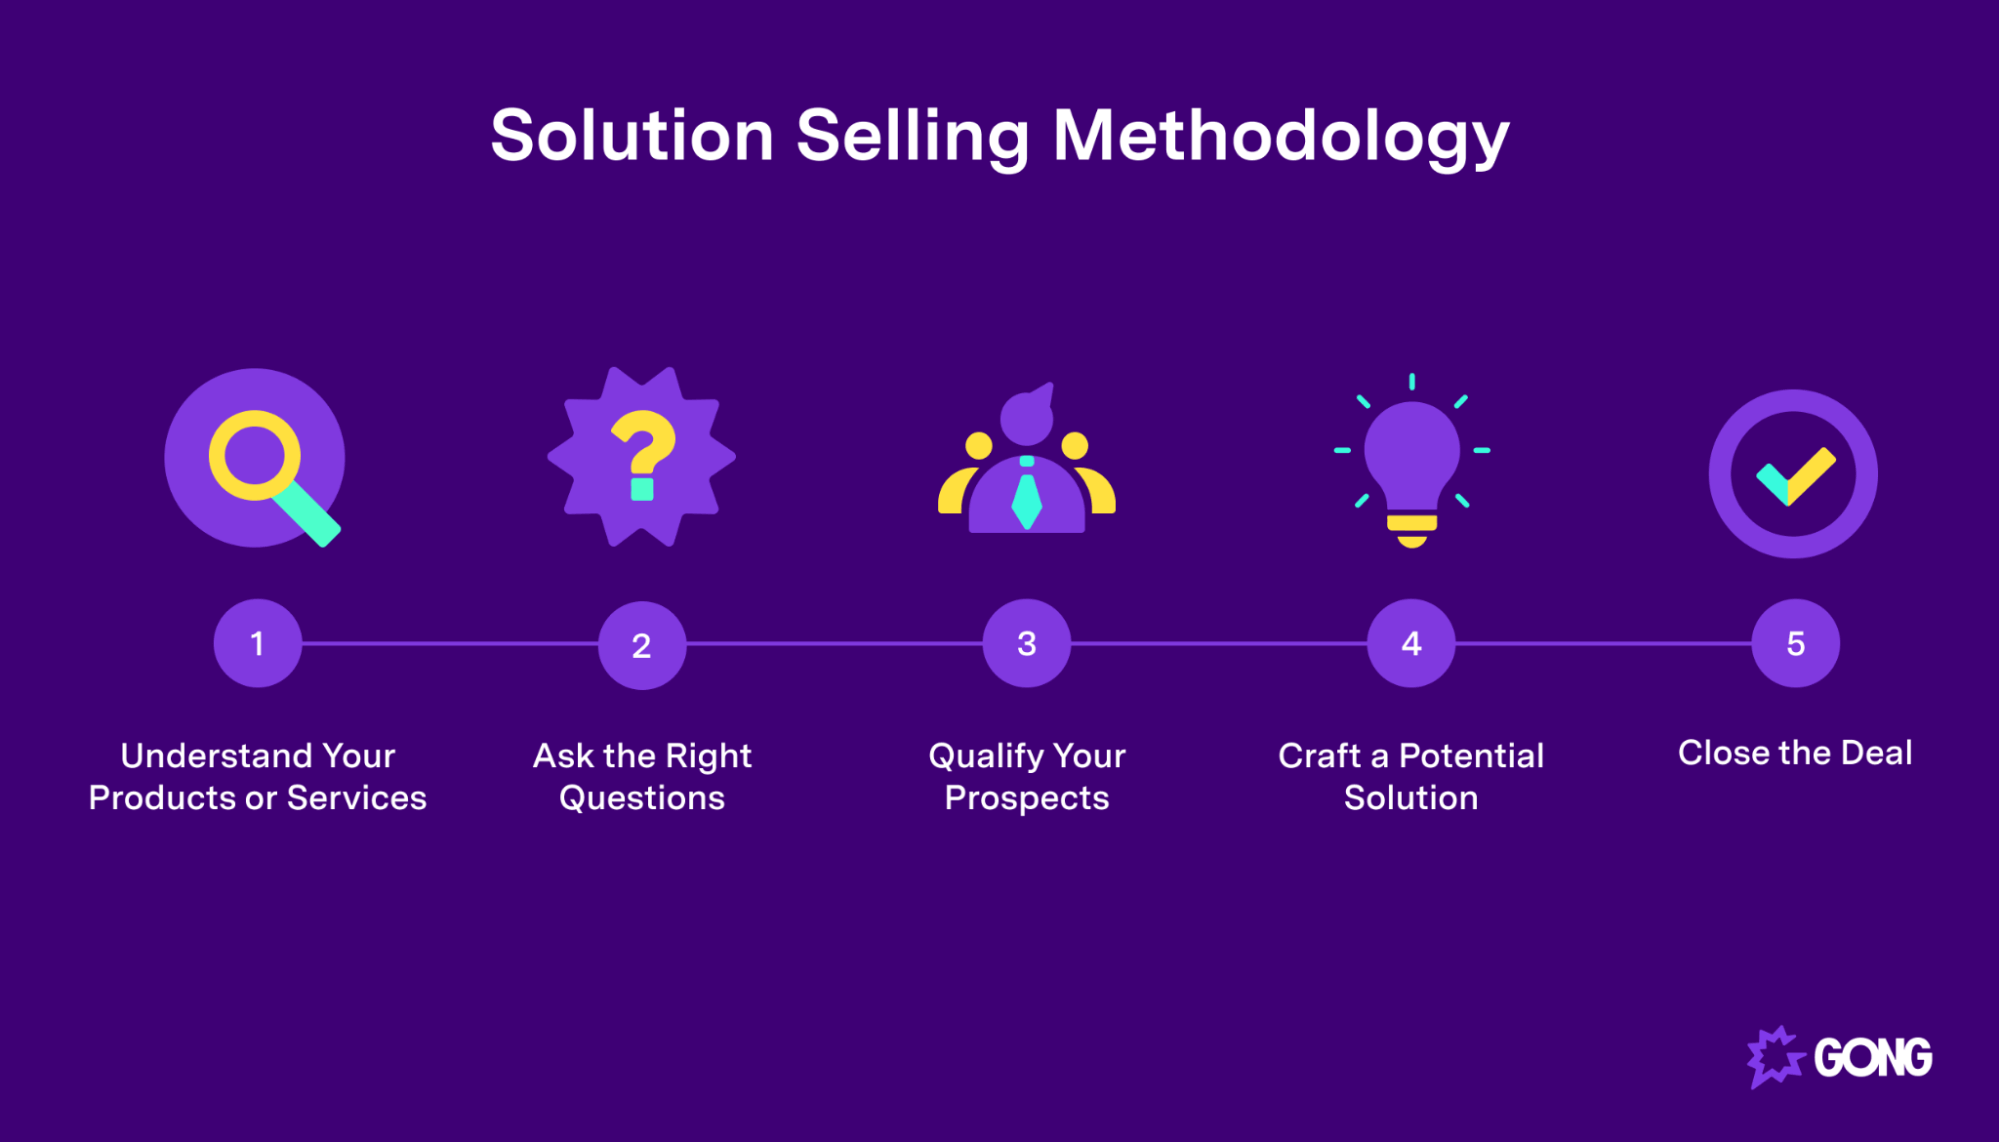 A Complete Guide to the Solution Selling Methodology Gong